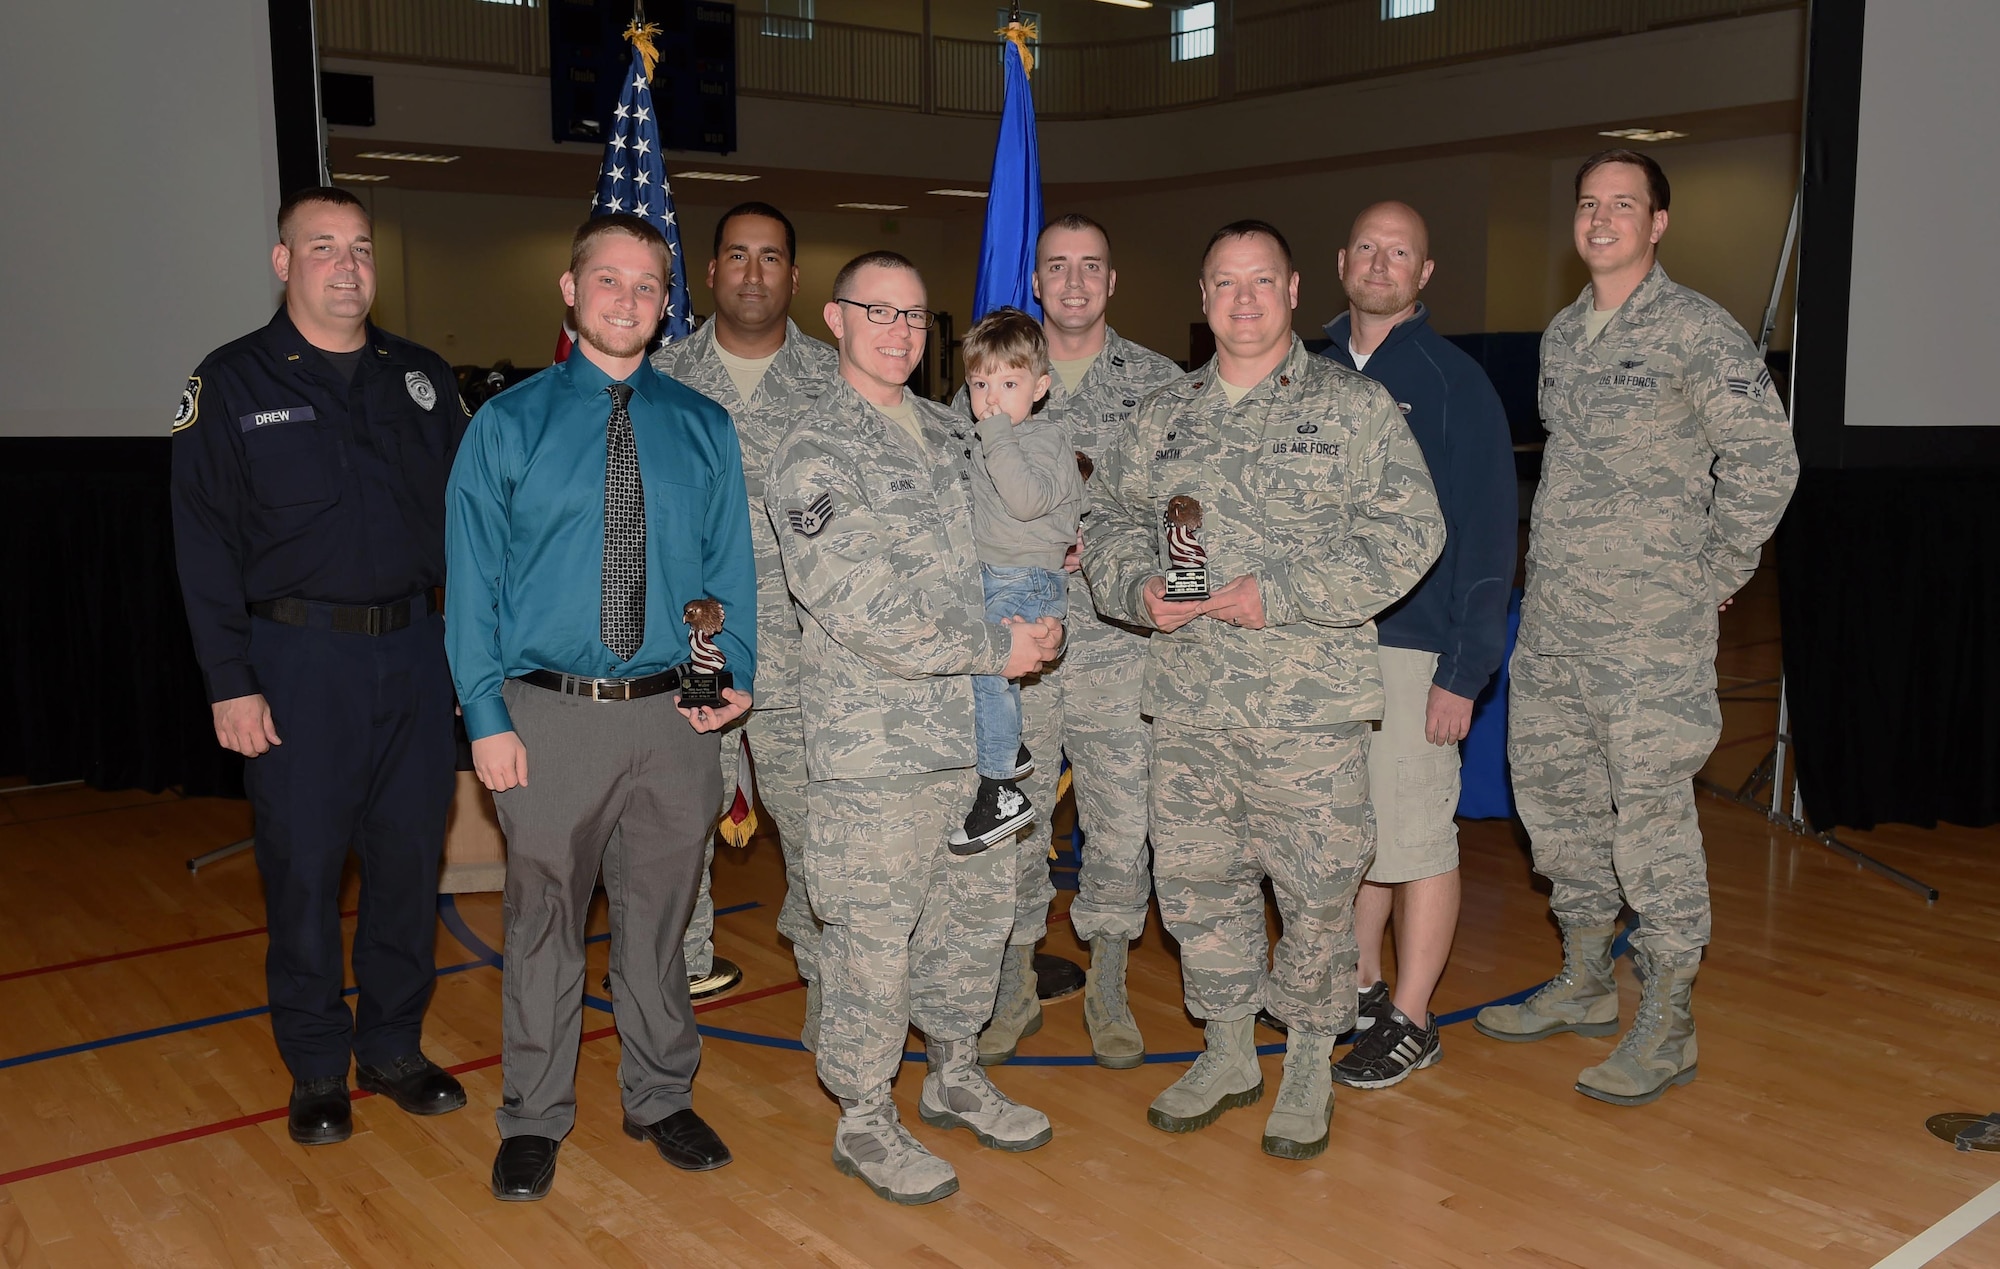 460th Space Wing quarterly award winners stand together after a ceremony Oct. 29, 2015, at the fitness center on Buckley Air Force Base, Colo. Each nominee had to submit a package and in front of a board to compete for the winning title. (U.S. Air Force photo by Airman 1st Class Samantha Meadors/Released)
